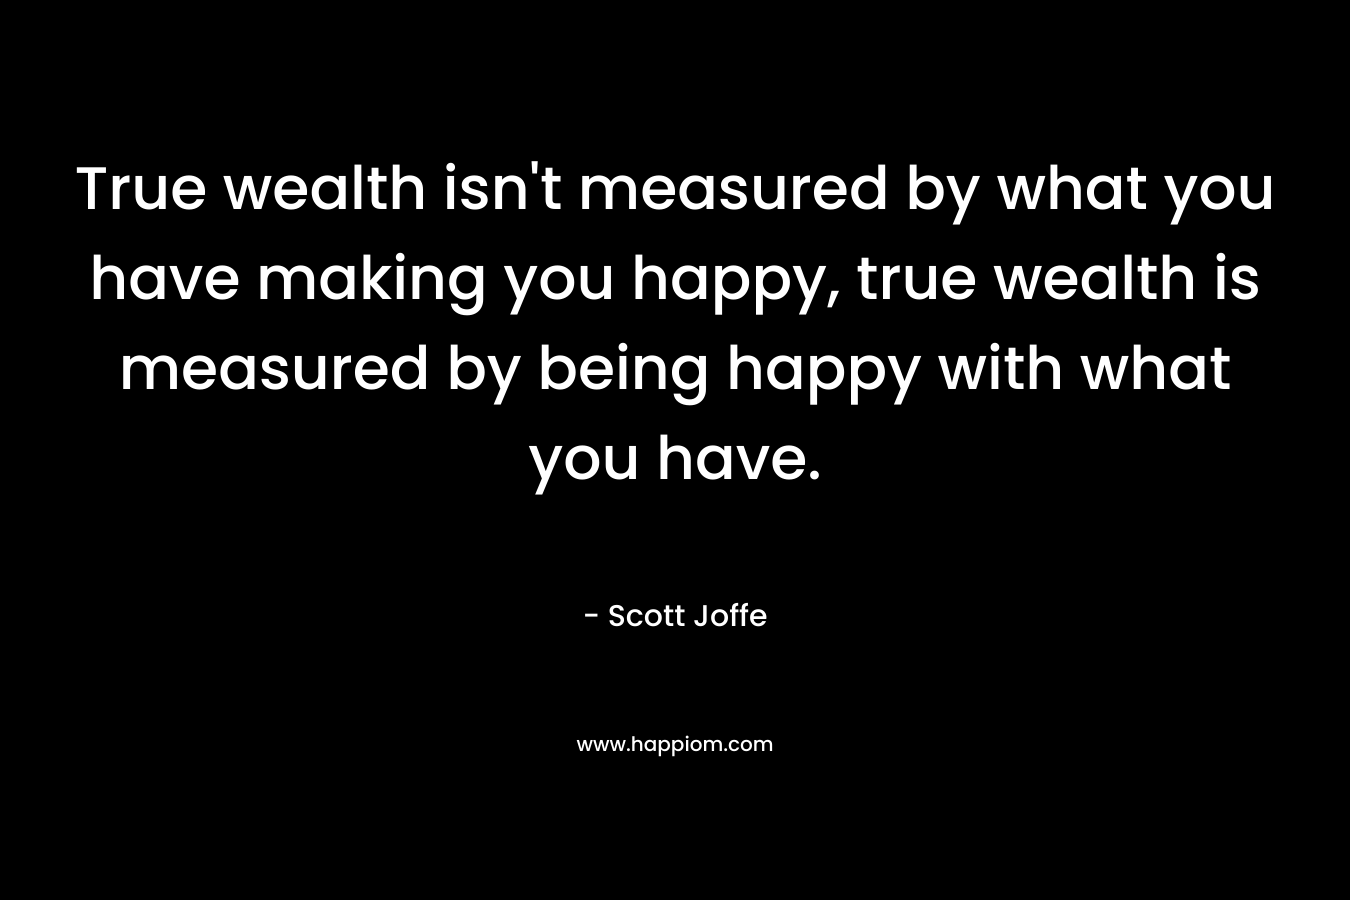 True wealth isn’t measured by what you have making you happy, true wealth is measured by being happy with what you have. – Scott Joffe